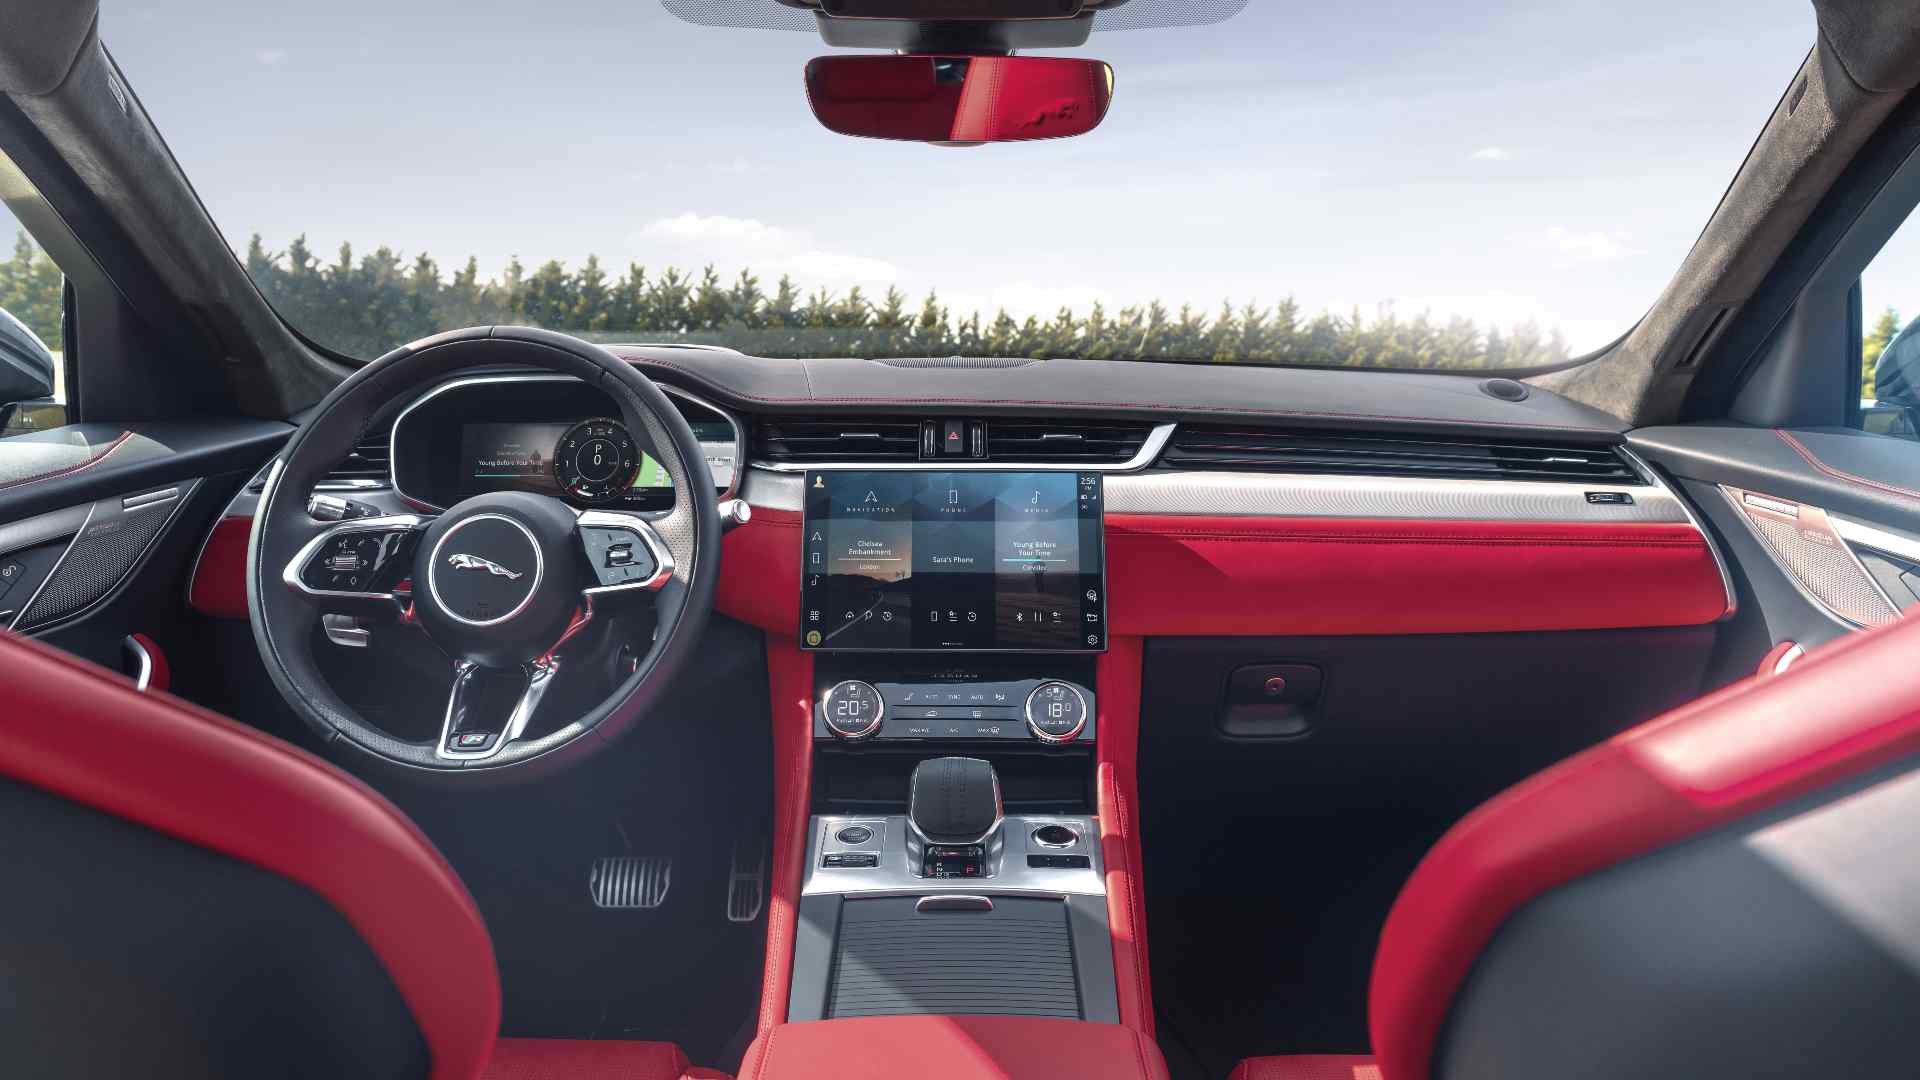 New 11.4-inch touchscreen takes centre stage on the redesigned dash. Image: Jaguar